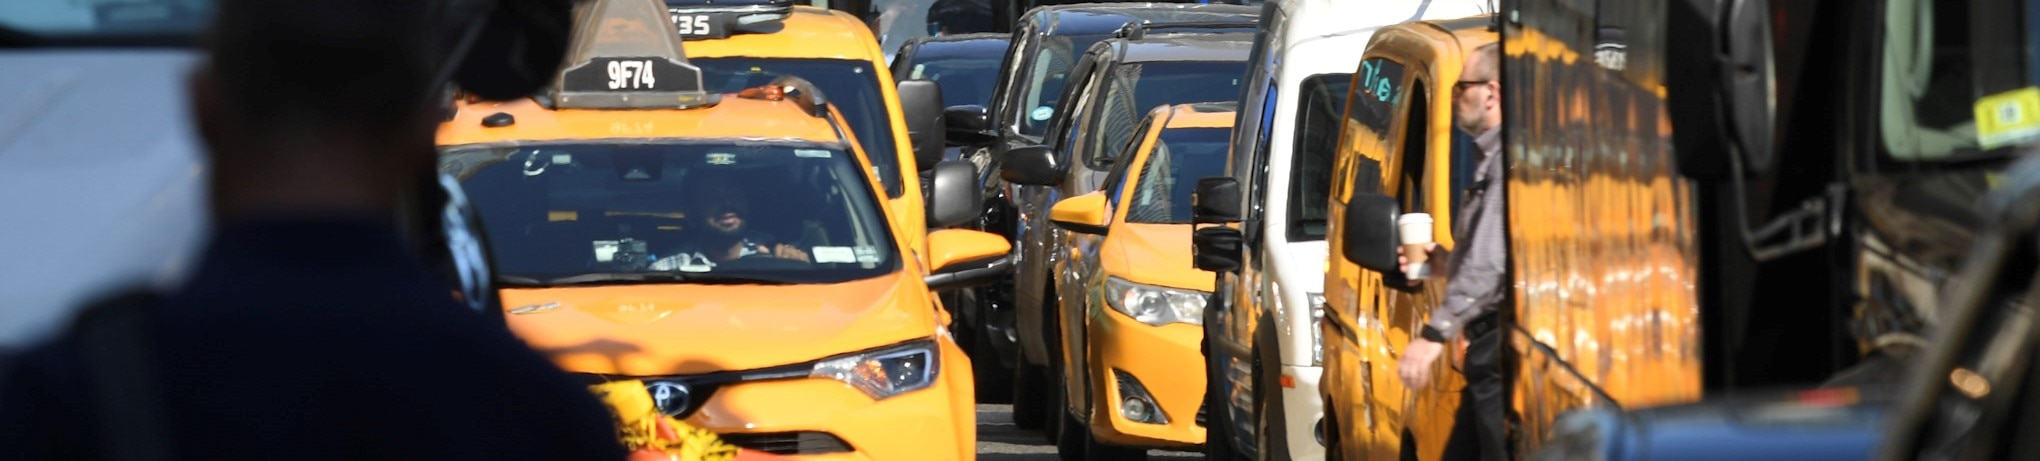 MTA Announces Major Progress on Congestion Pricing: Traffic Mobility Review Board Empaneled and Environmental Assessment Release Expected Within Two Weeks